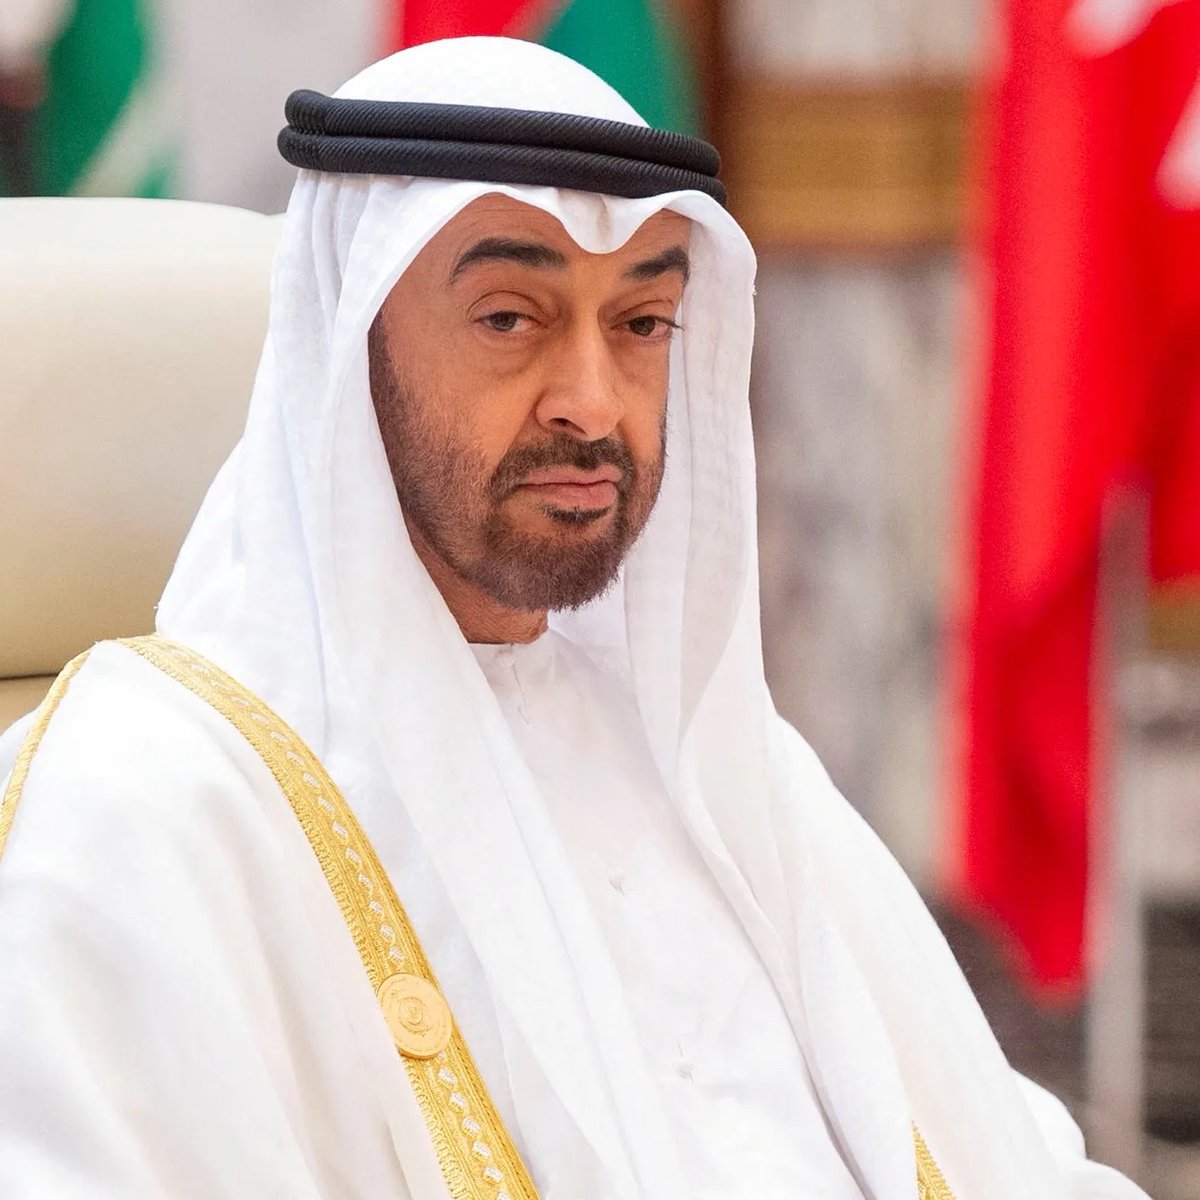 🚨🇦🇪🇷🇺 UAE President Zayed Al Nahyan was the FIRST LEADER to congratulate PRESIDENT PUTIN on his inauguration.